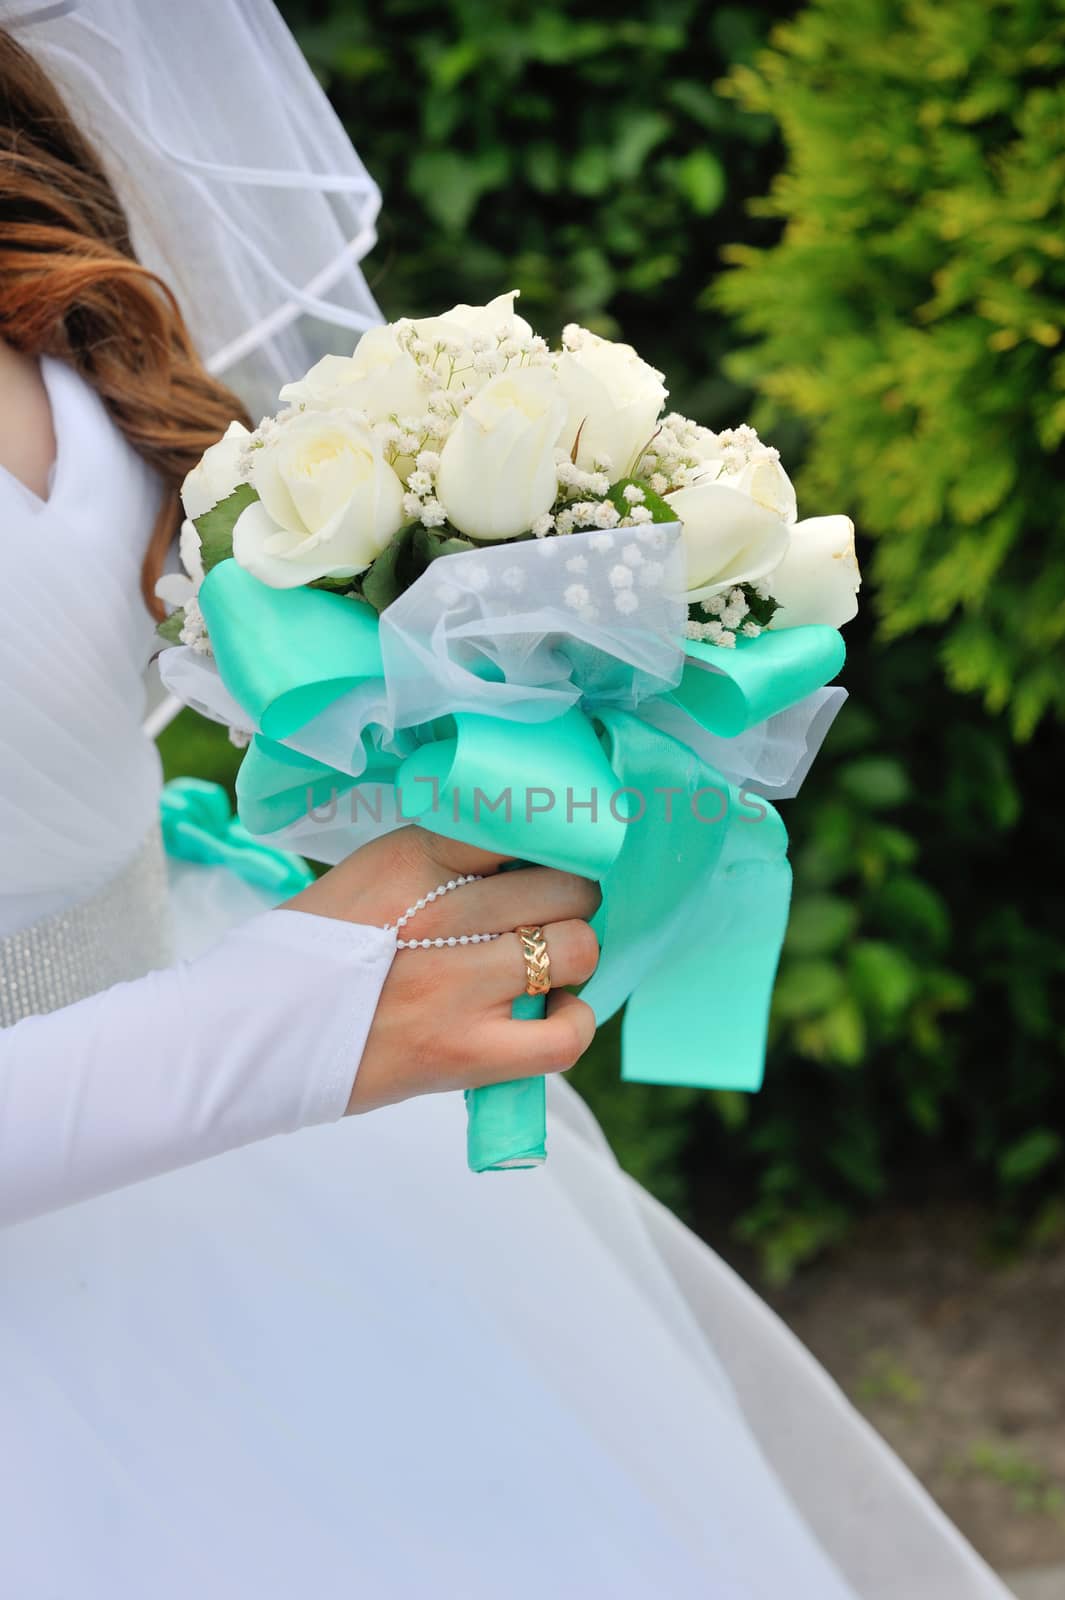 Bride Holding Bouquet of White Roses by timonko